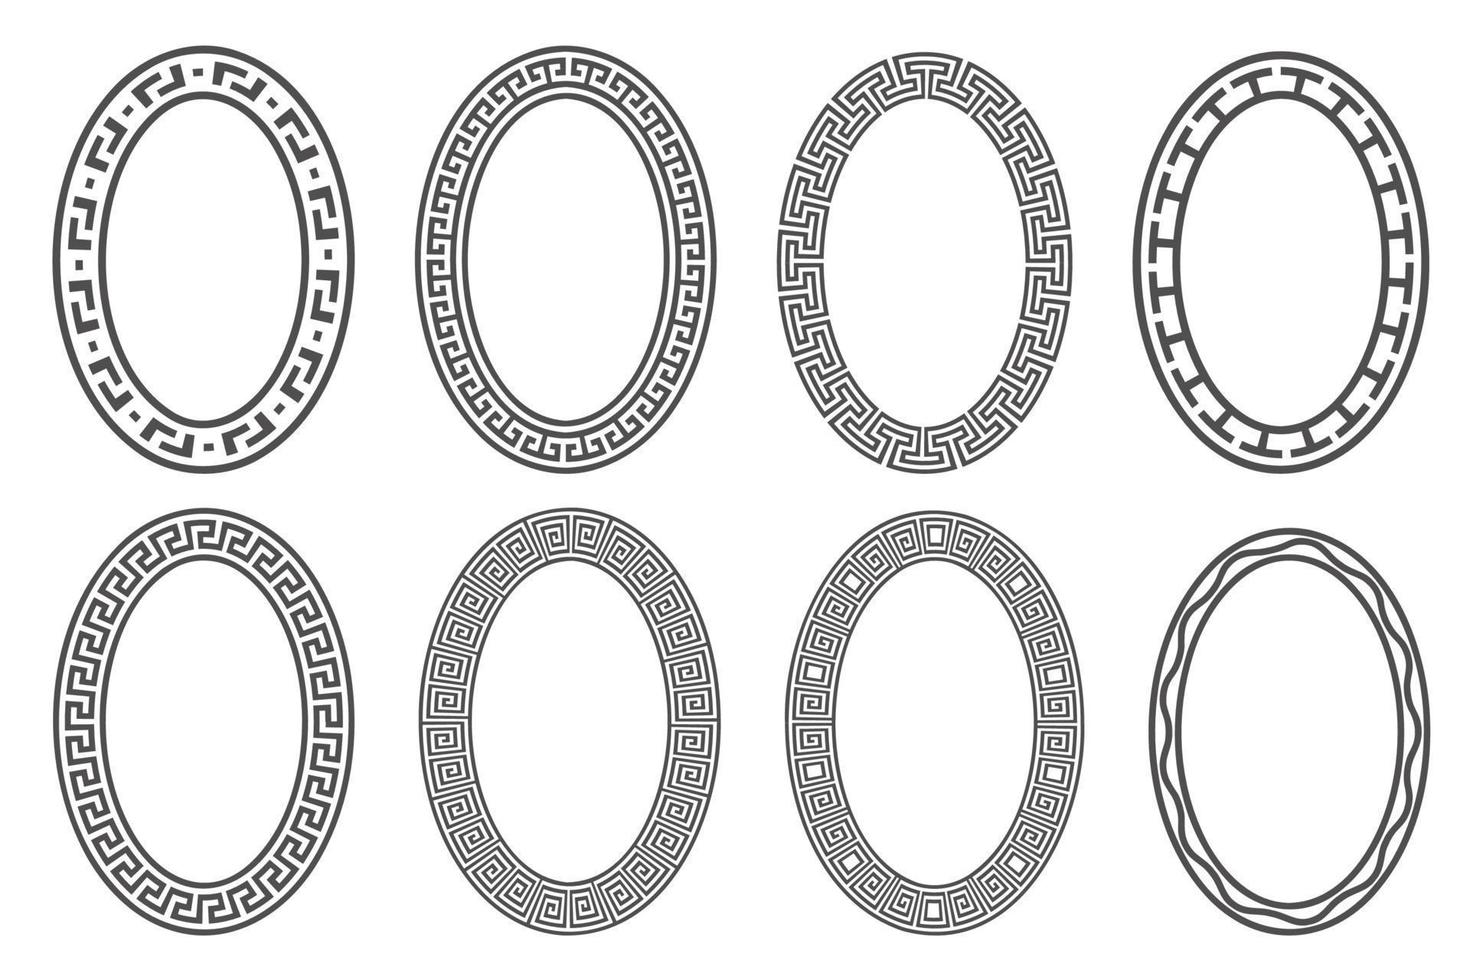 Greek key oval frame set. Circle borders with meander ornaments. Ellipse ancient designs. Vector